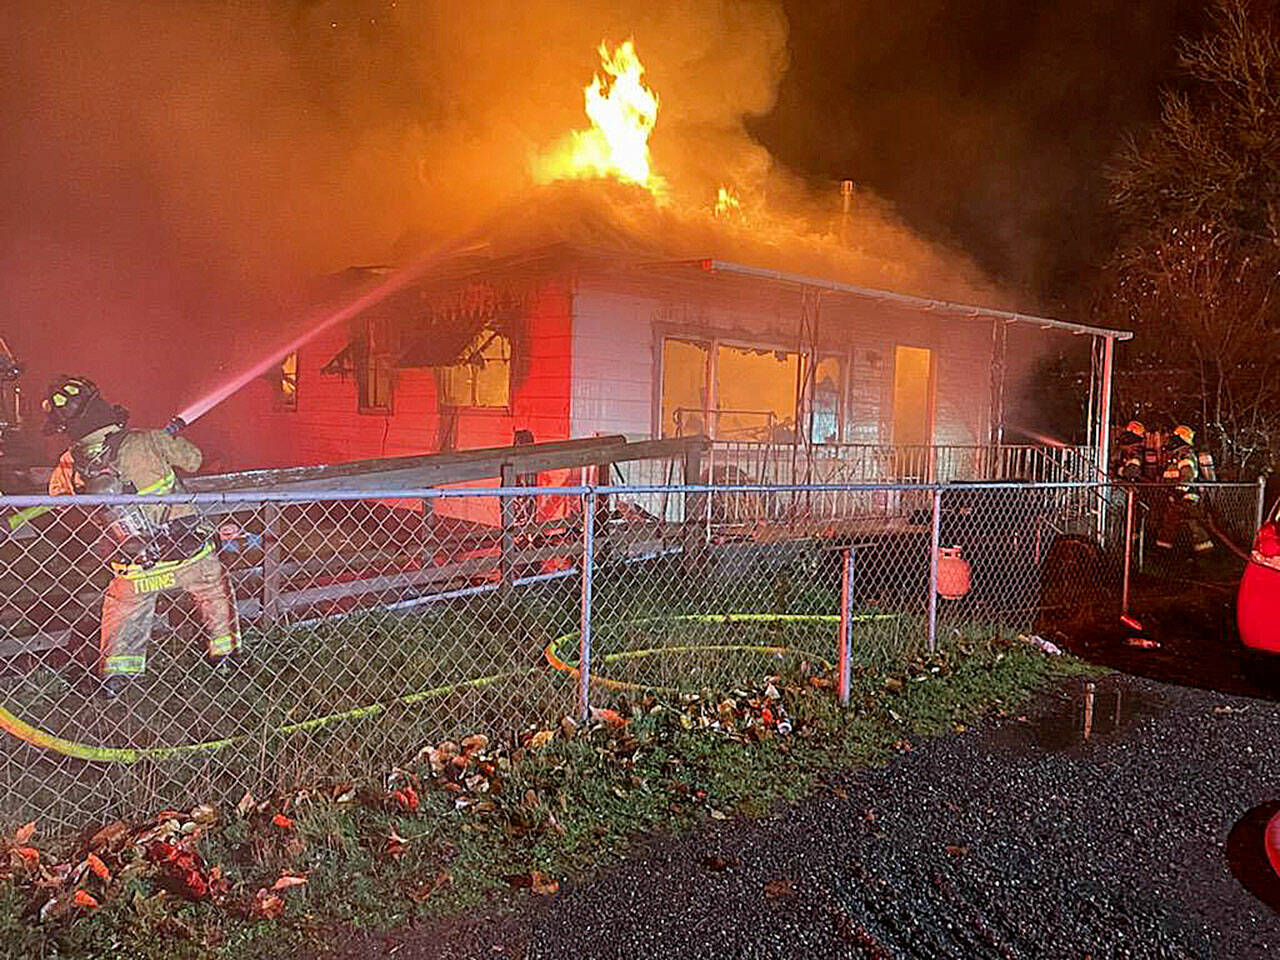 Courtesy of Grays Harbor Fire District 5 
Crews from multiple agencies battled a fully-involved structure fire on Mox Chehalis Road in Malone early Friday morning, Nov. 26, 2021.